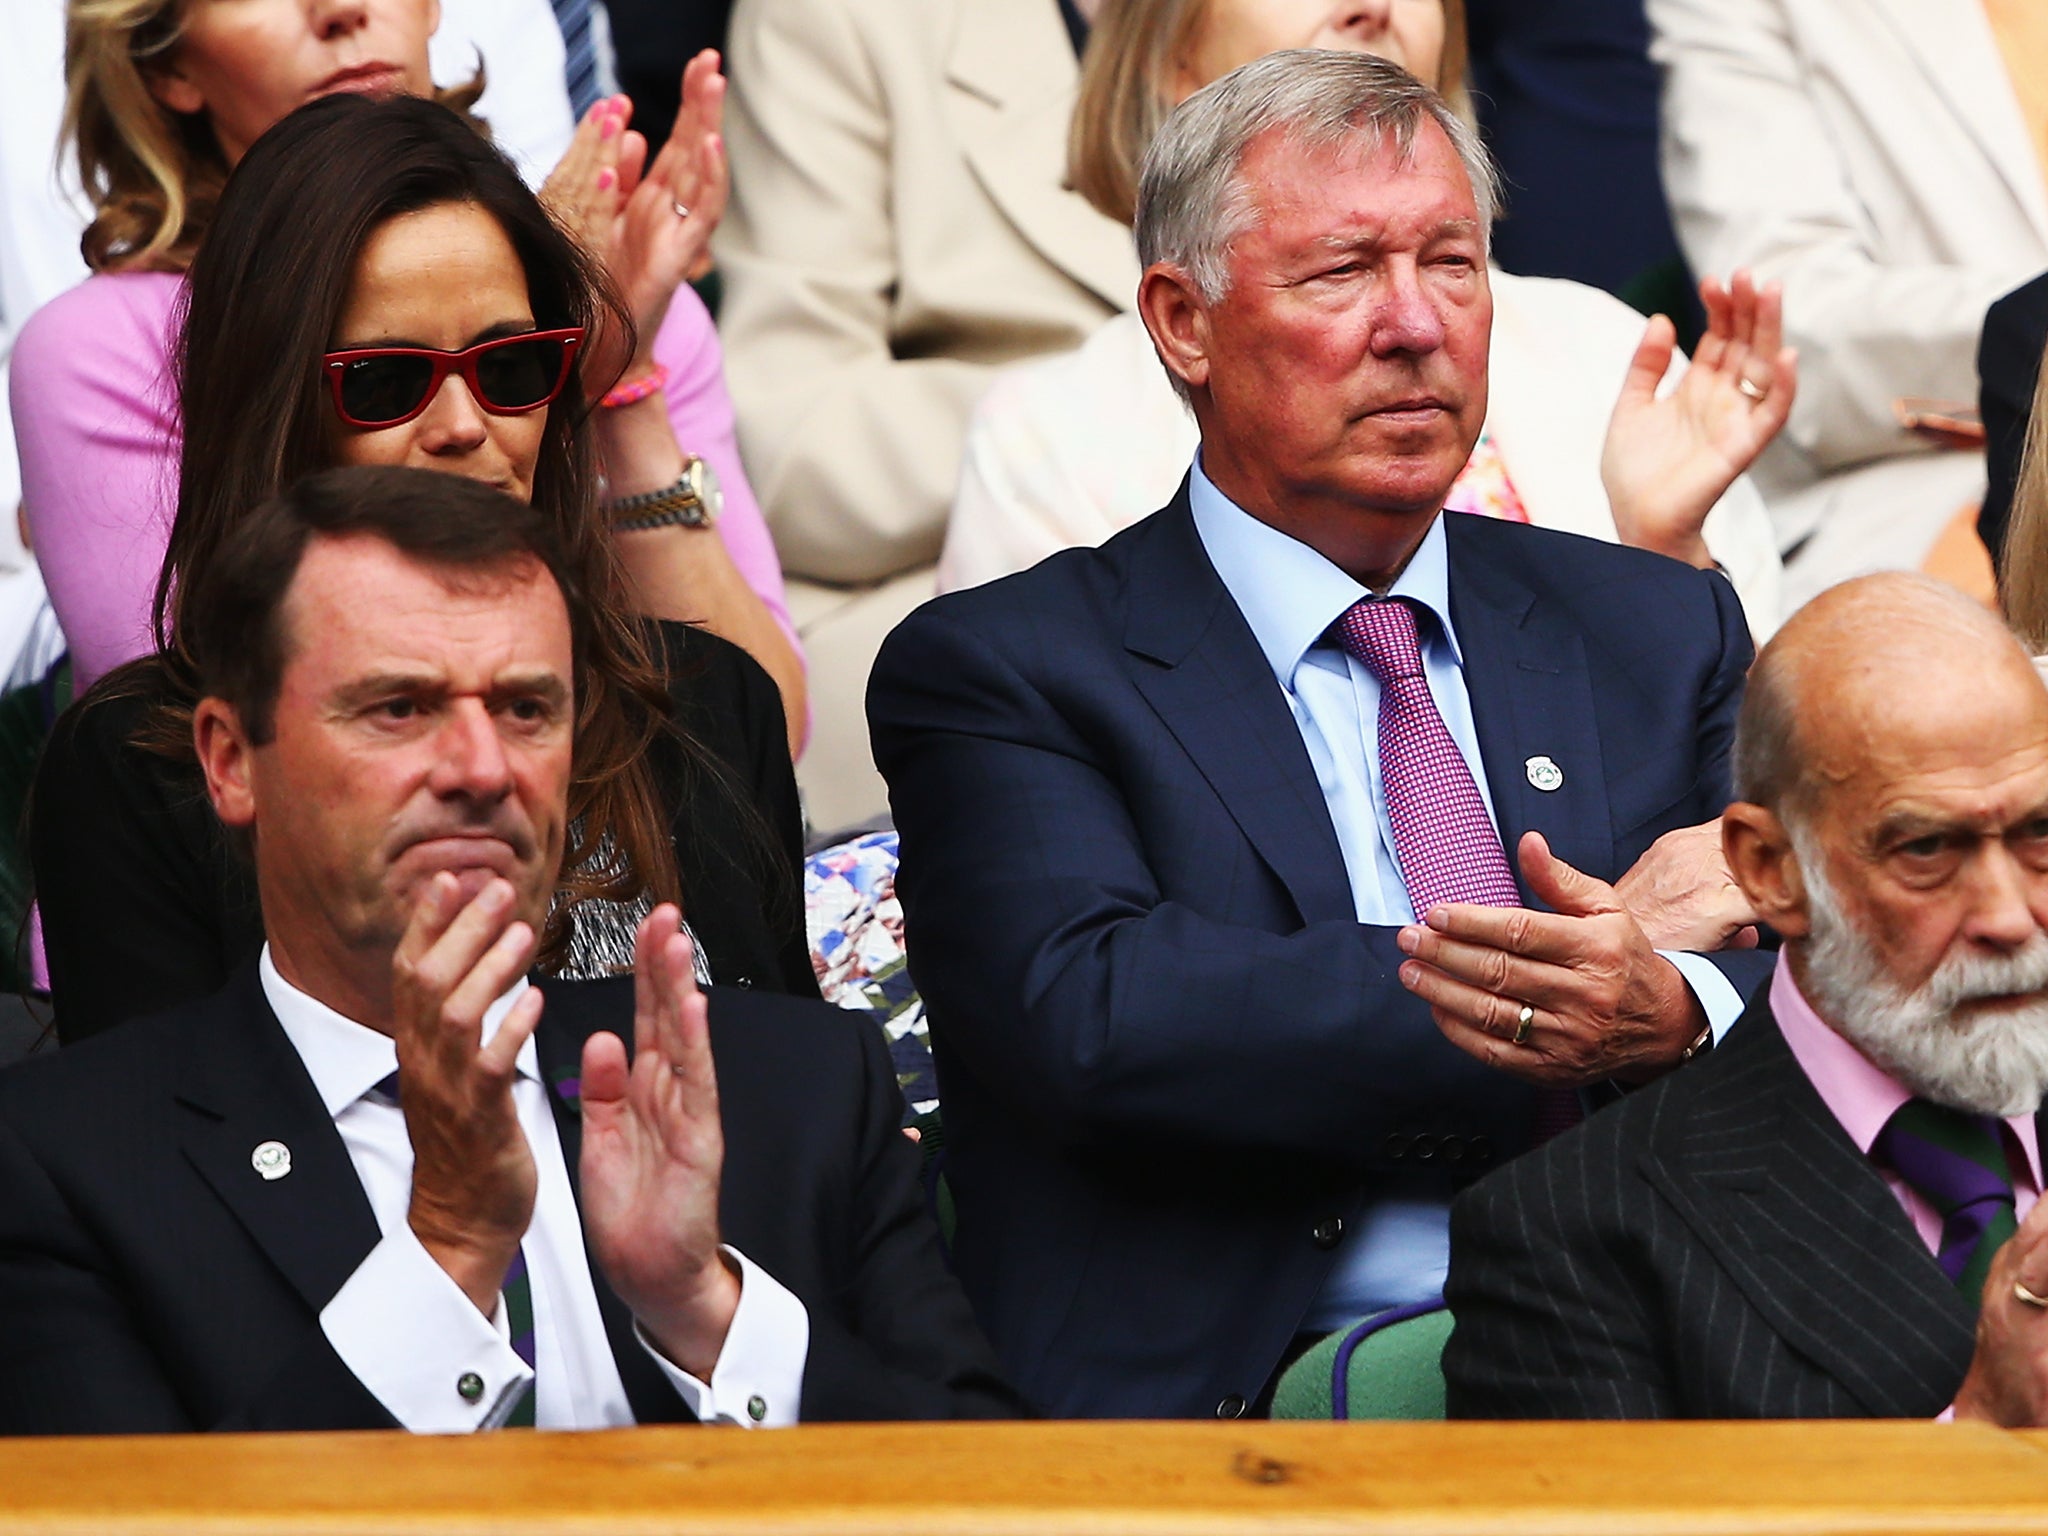 Sir Alex Ferguson watches Andy Murray in action